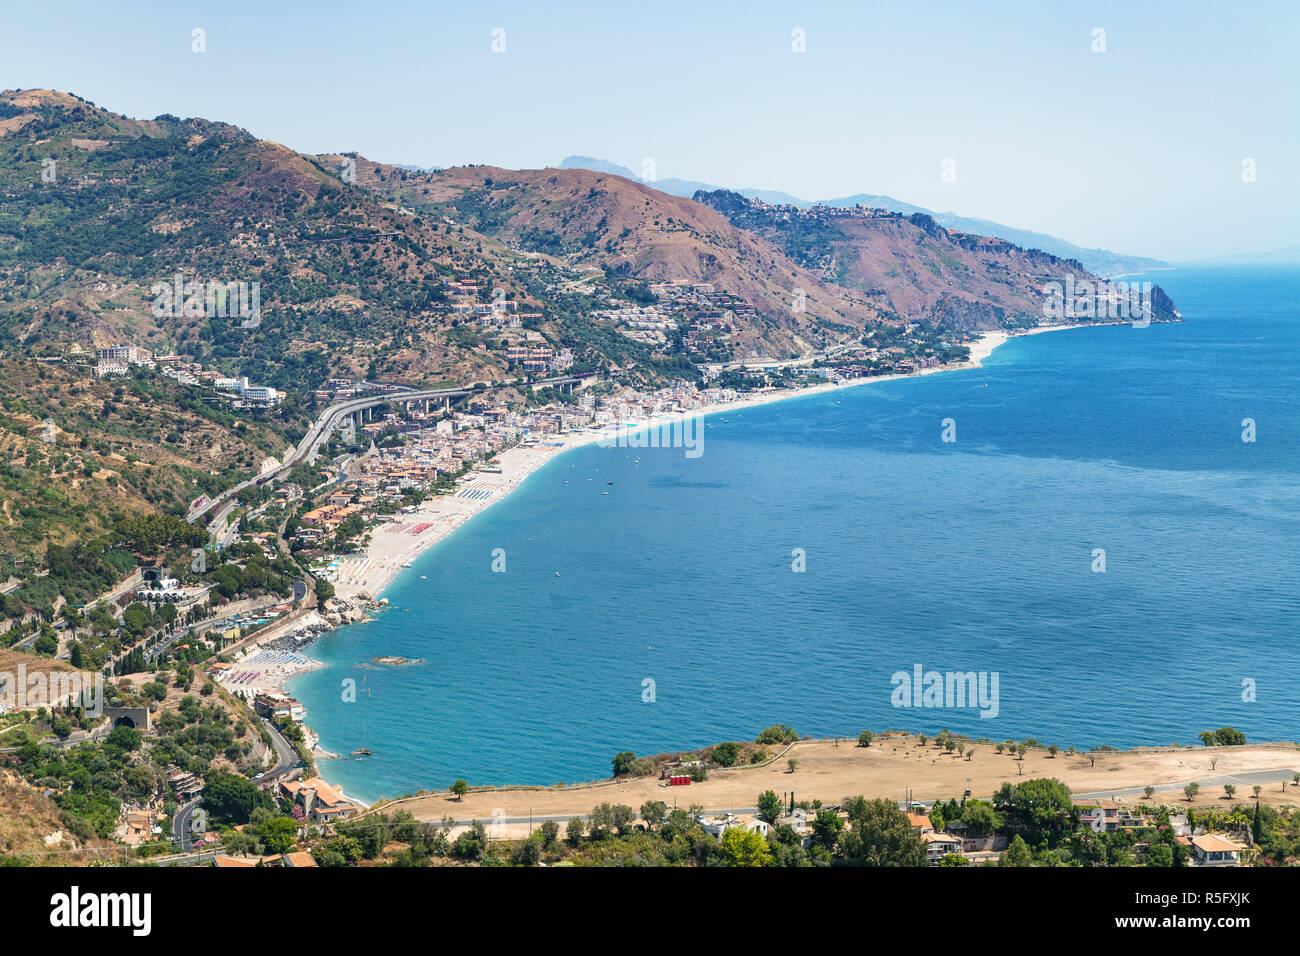 above view of Letojanni resort town from Taormina Stock Photo